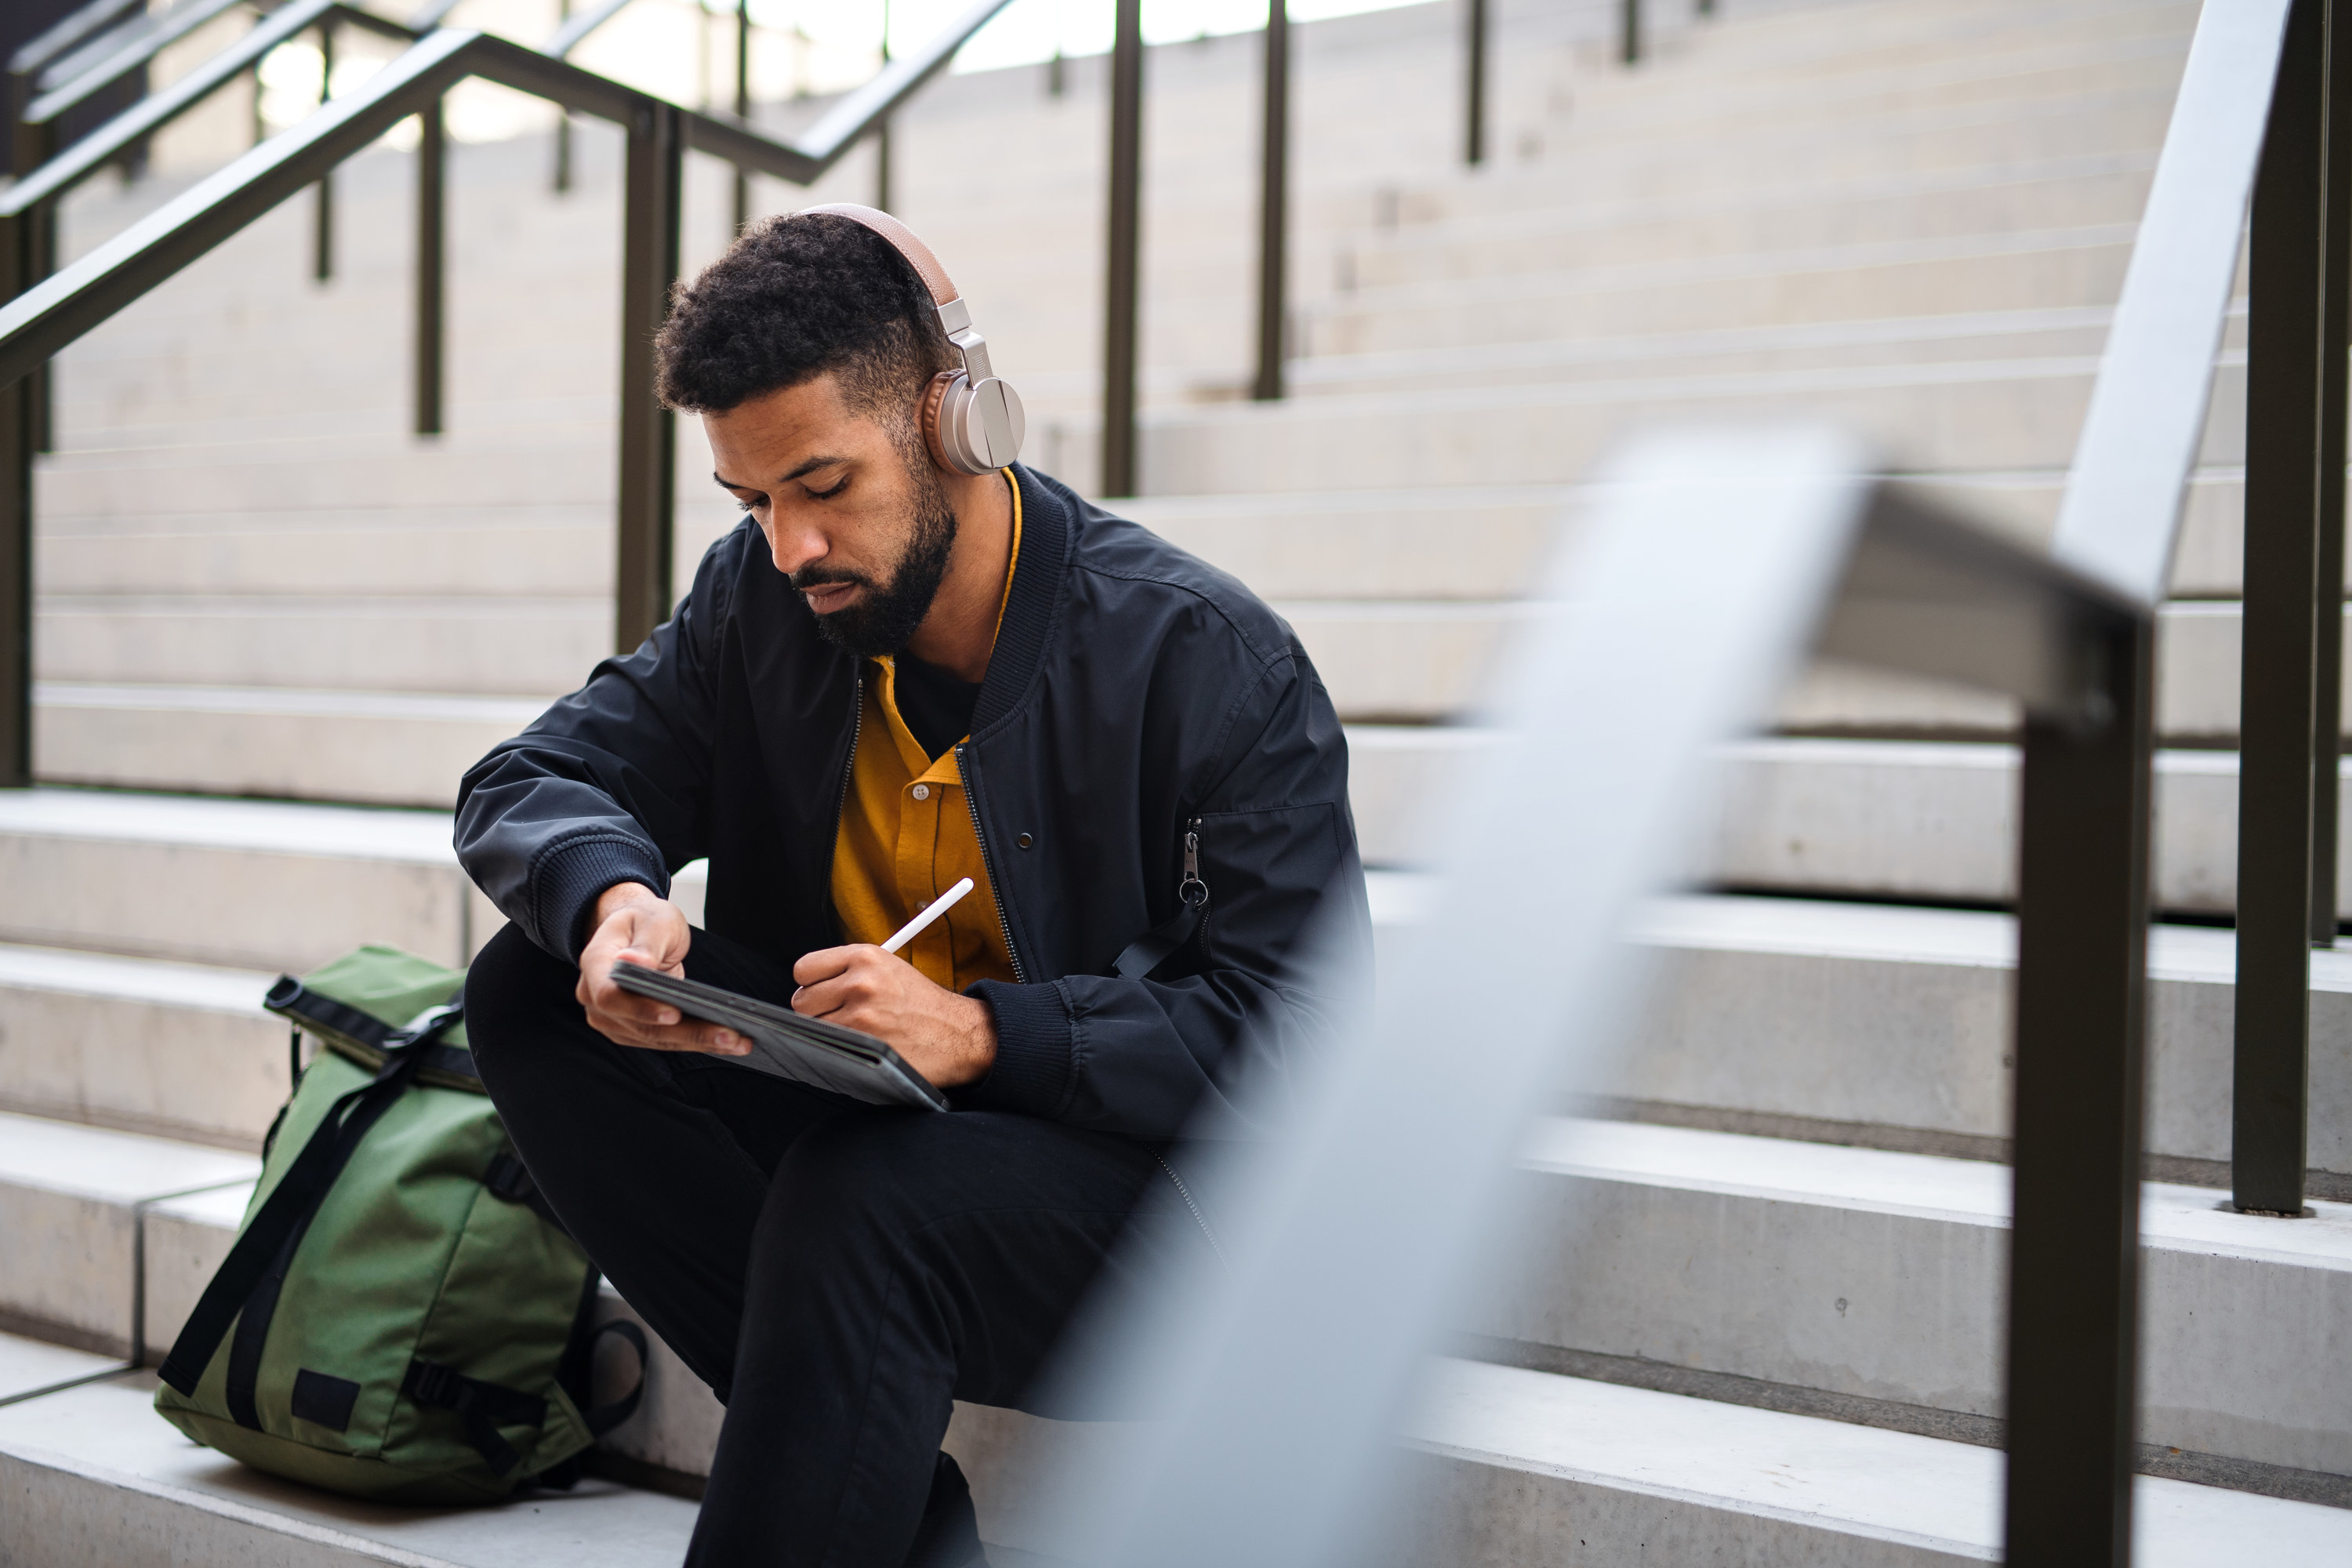 a man sitting on steps writing in a notebook with headphones on